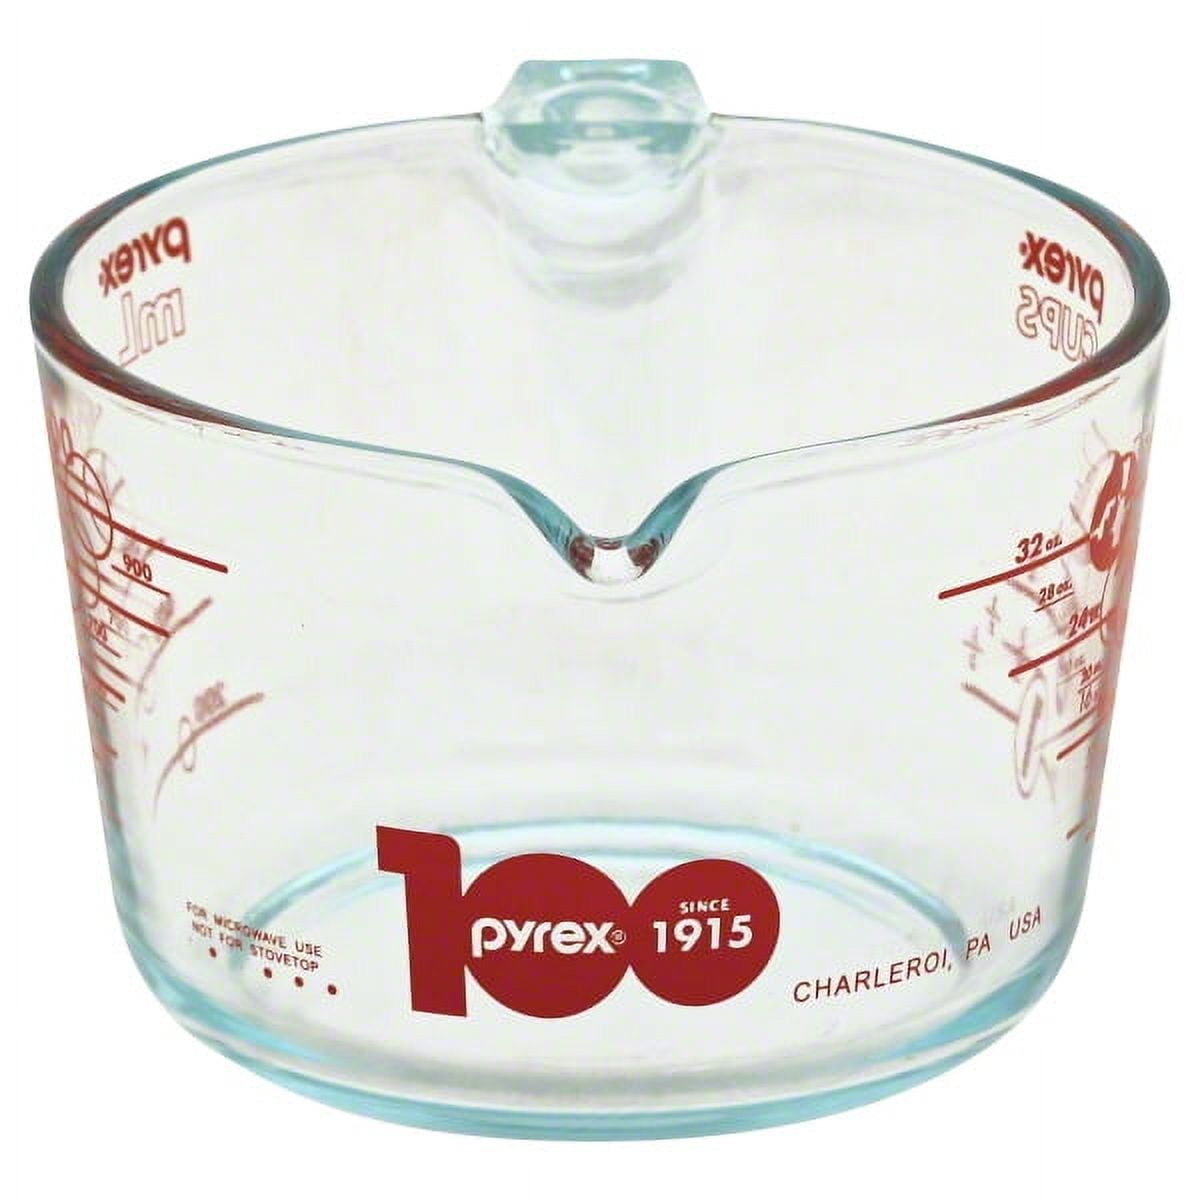 Vintage Pyrex Measuring Cup, 4 Cup/ 32 Ounce Capacity, Bright Red